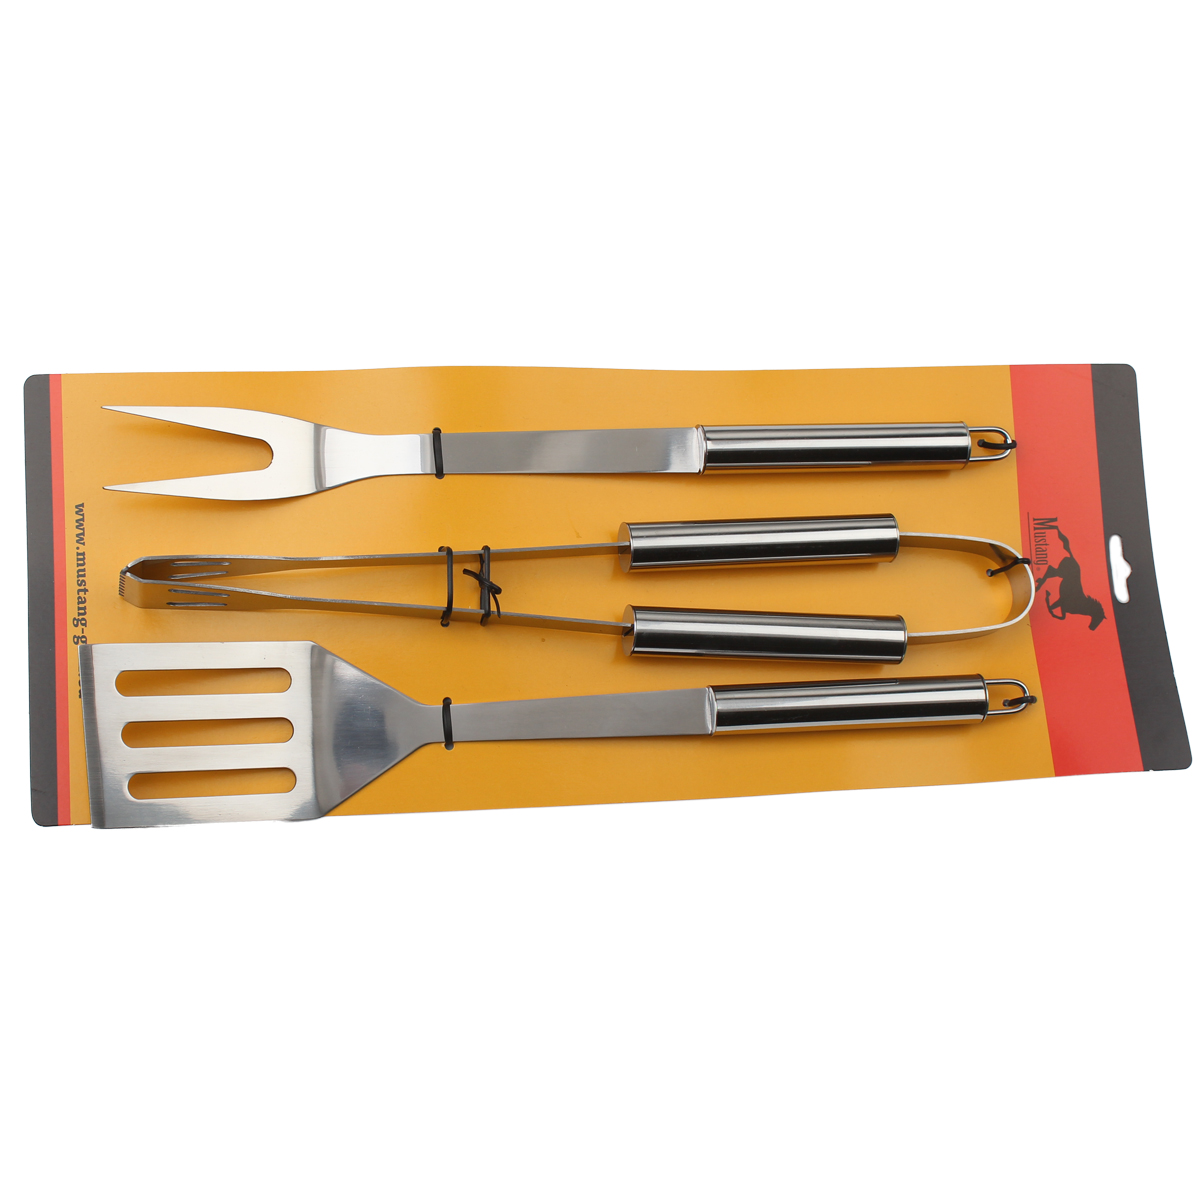 Triad of Stainless steel BBQ Sets